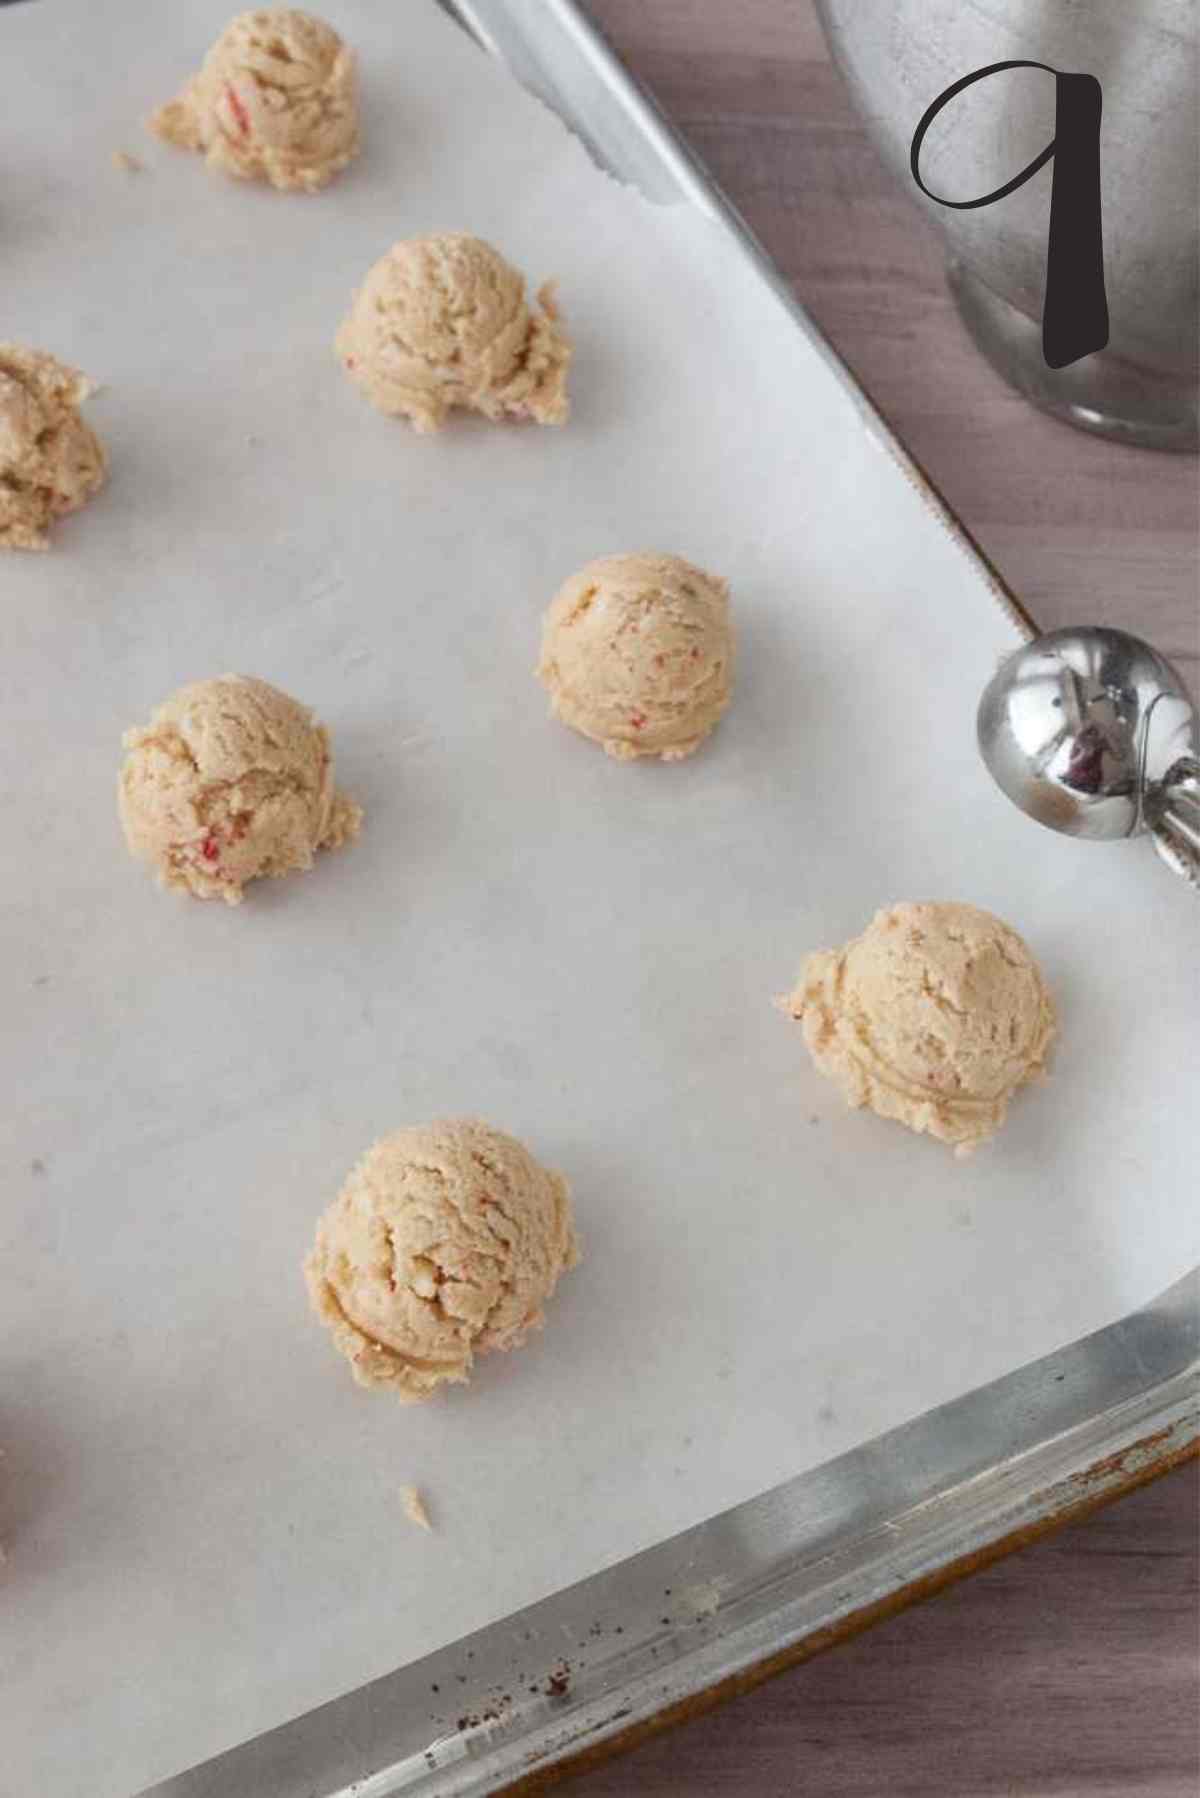 Cookie dough scooped onto baking sheet with parchment paper.